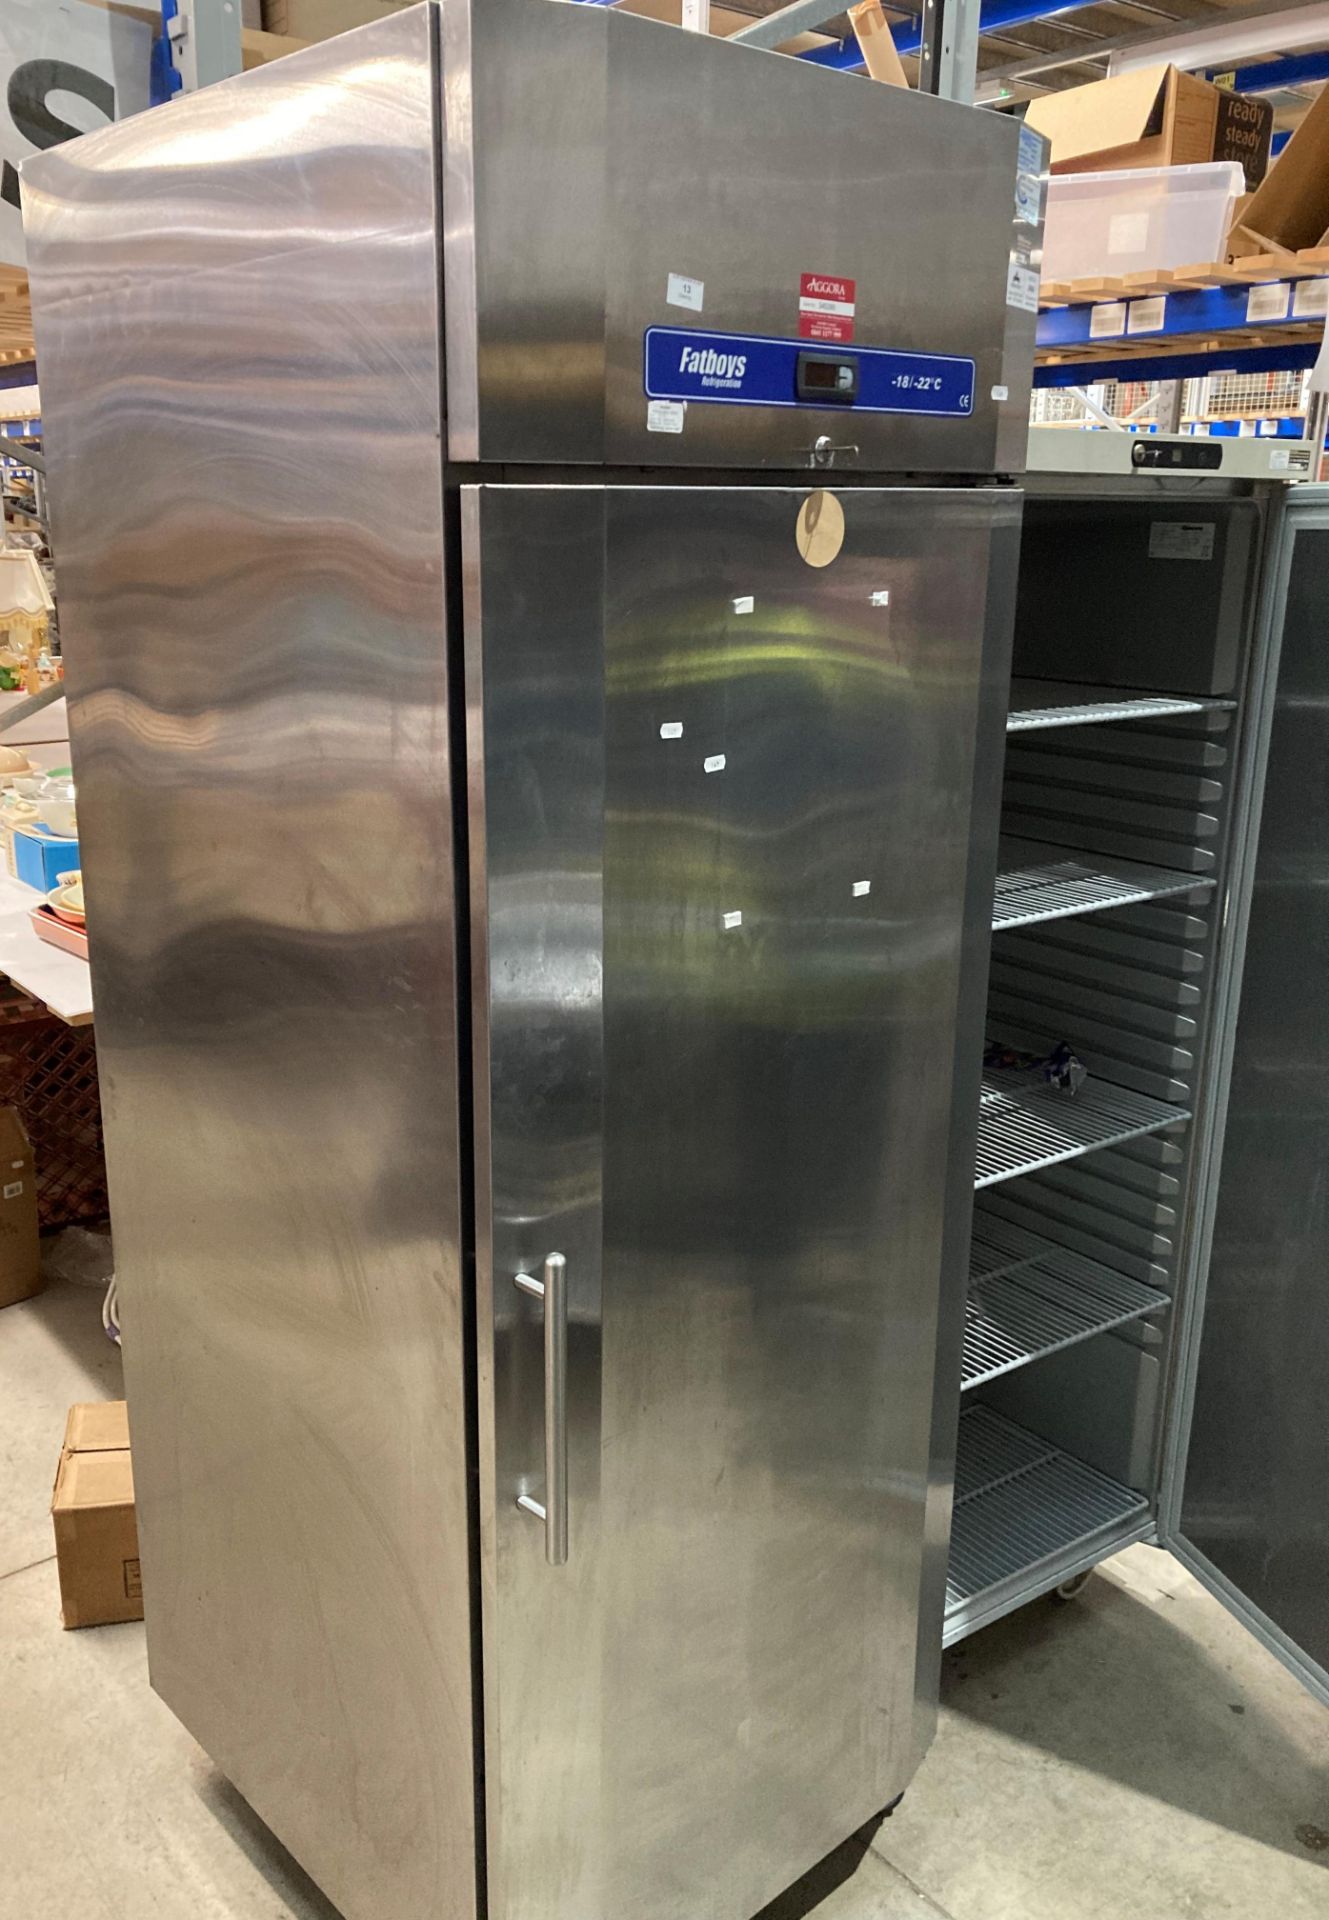 Fatboys stainless steel 240v refrigeration unit on castors model HPT600 complete with key (failed